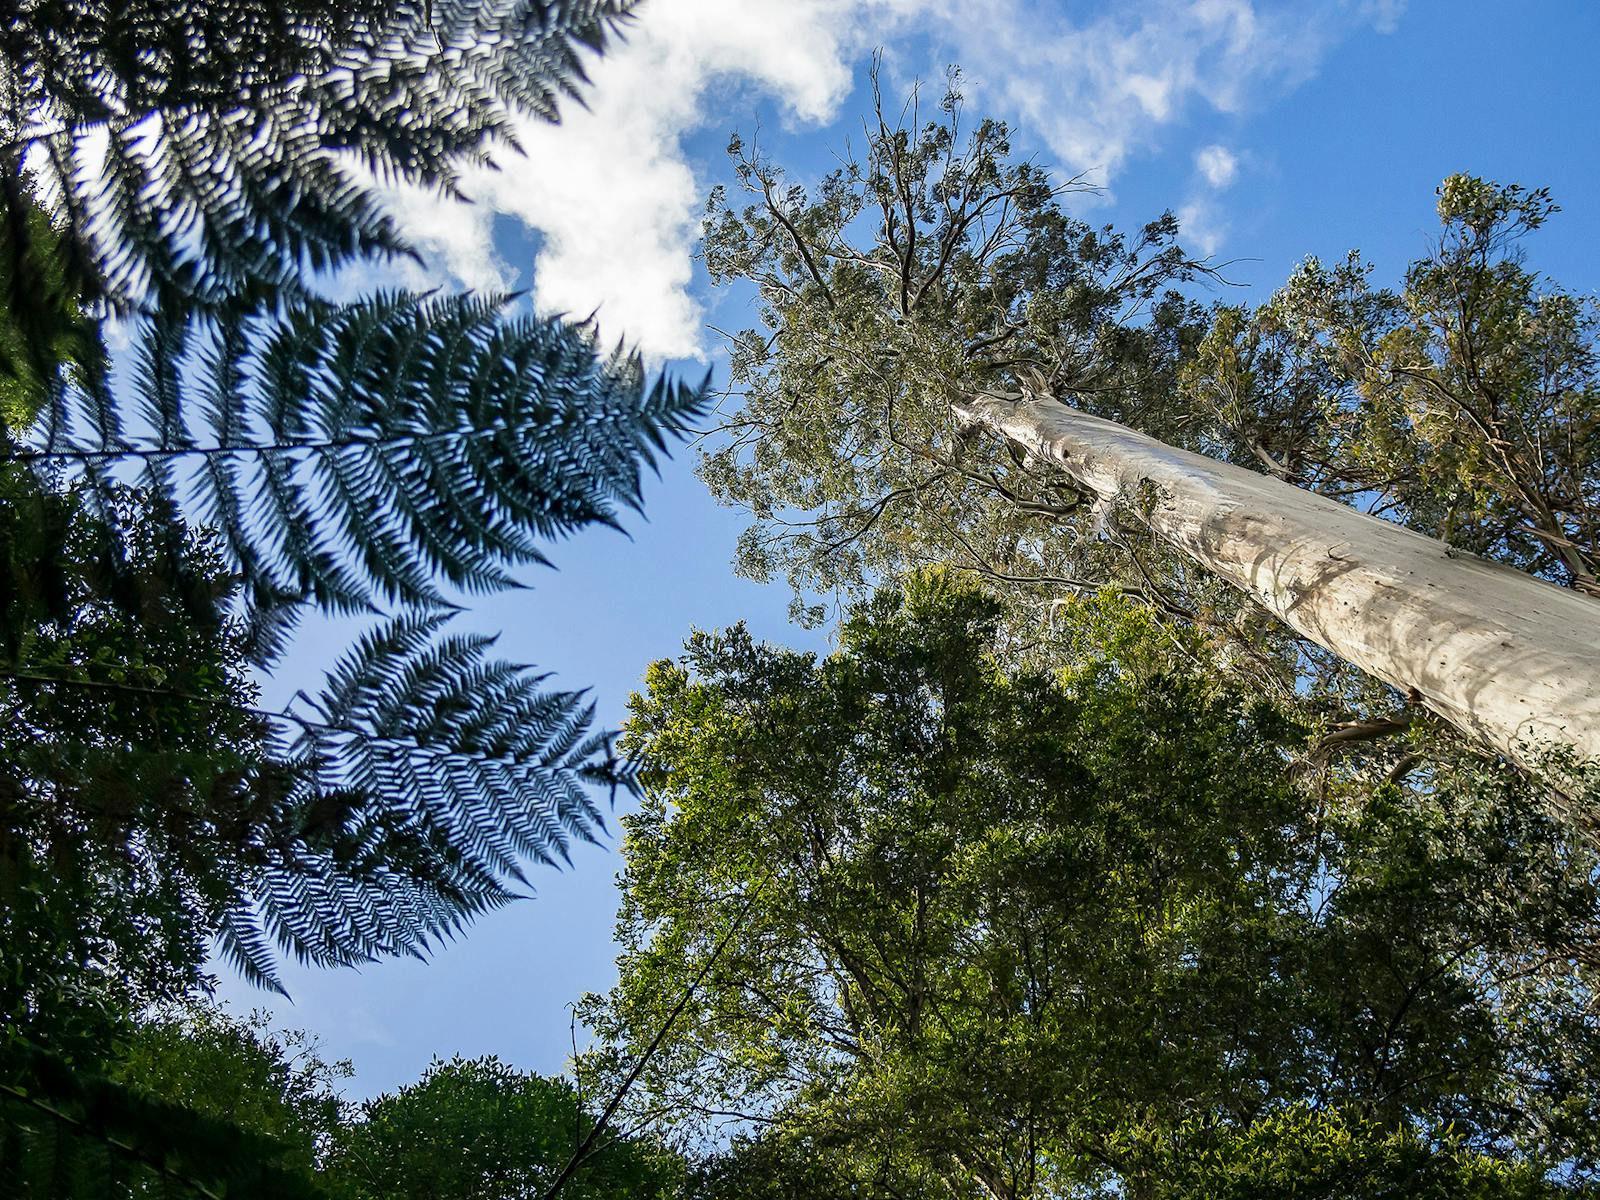 One of the giant eucalypts of Tasmania's Styx Valley